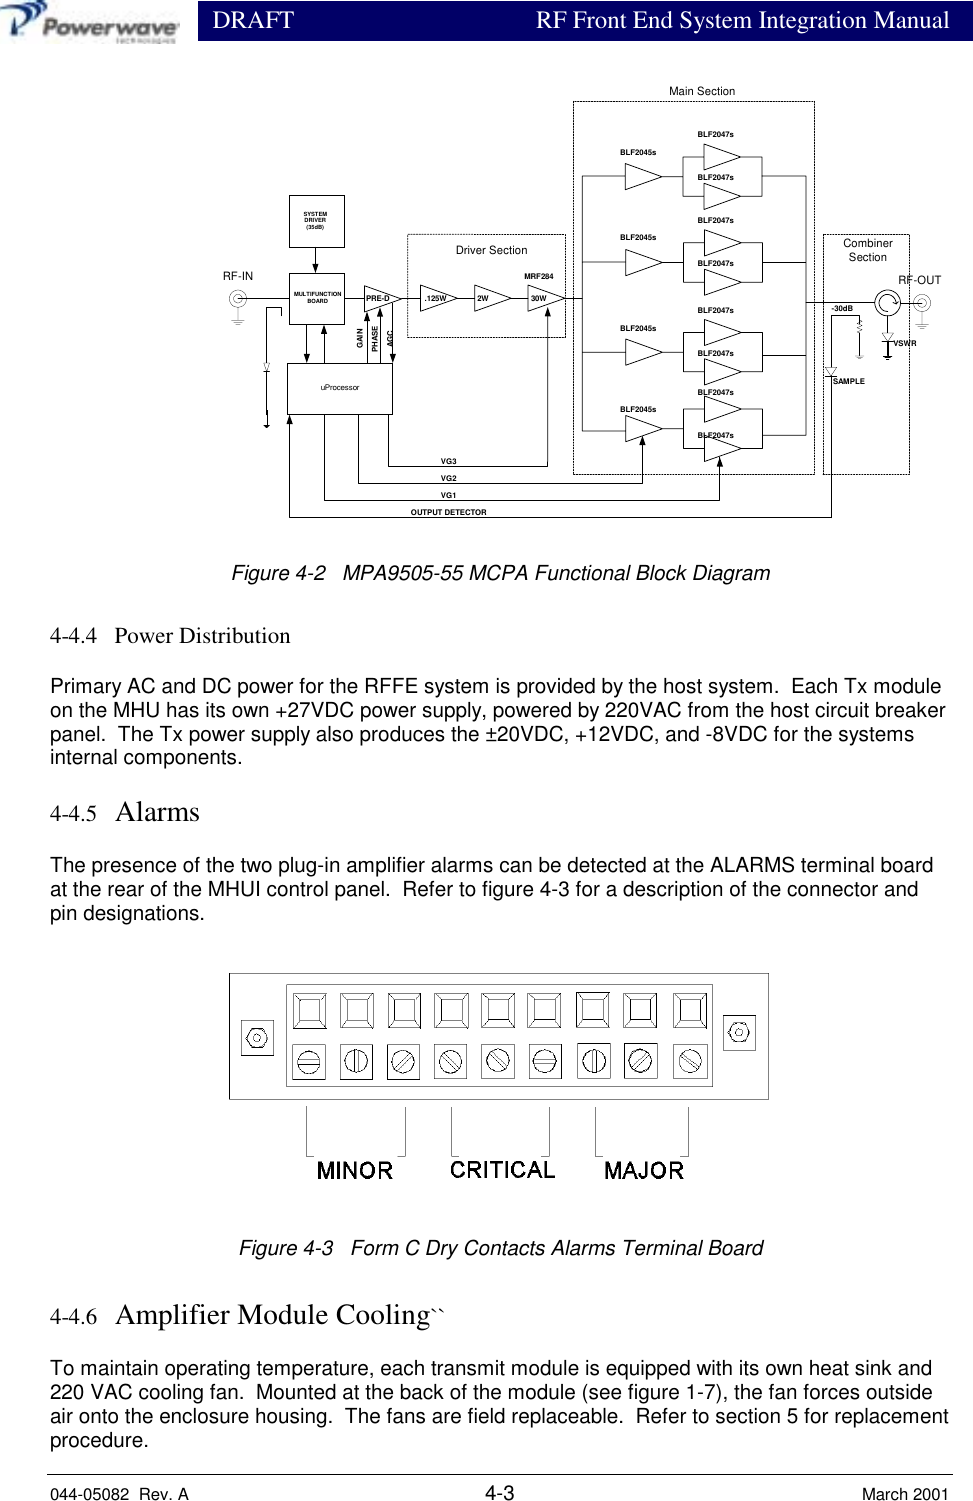                  DRAFT RF Front End System Integration Manual044-05082  Rev. A 4-3 March 2001Figure 4-2   MPA9505-55 MCPA Functional Block Diagram4-4.4   Power DistributionPrimary AC and DC power for the RFFE system is provided by the host system.  Each Tx moduleon the MHU has its own +27VDC power supply, powered by 220VAC from the host circuit breakerpanel.  The Tx power supply also produces the ±20VDC, +12VDC, and -8VDC for the systemsinternal components.4-4.5   AlarmsThe presence of the two plug-in amplifier alarms can be detected at the ALARMS terminal boardat the rear of the MHUI control panel.  Refer to figure 4-3 for a description of the connector andpin designations.Figure 4-3   Form C Dry Contacts Alarms Terminal Board4-4.6   Amplifier Module Cooling``To maintain operating temperature, each transmit module is equipped with its own heat sink and220 VAC cooling fan.  Mounted at the back of the module (see figure 1-7), the fan forces outsideair onto the enclosure housing.  The fans are field replaceable.  Refer to section 5 for replacementprocedure.SAMPLE-30dBRF-IN RF-OUTVSWR30W.125WDriver SectionMain SectionCombinerSectionuProcessorBLF2047sBLF2045s2WPRE-DMULTIFUNCTIONBOARDSYSTEMDRIVER(35dB)BLF2047sBLF2047sBLF2045sBLF2047sBLF2047sBLF2045sBLF2047sBLF2047sBLF2045sBLF2047sVG3VG2VG1OUTPUT DETECTORGAINPHASEAGCMRF284